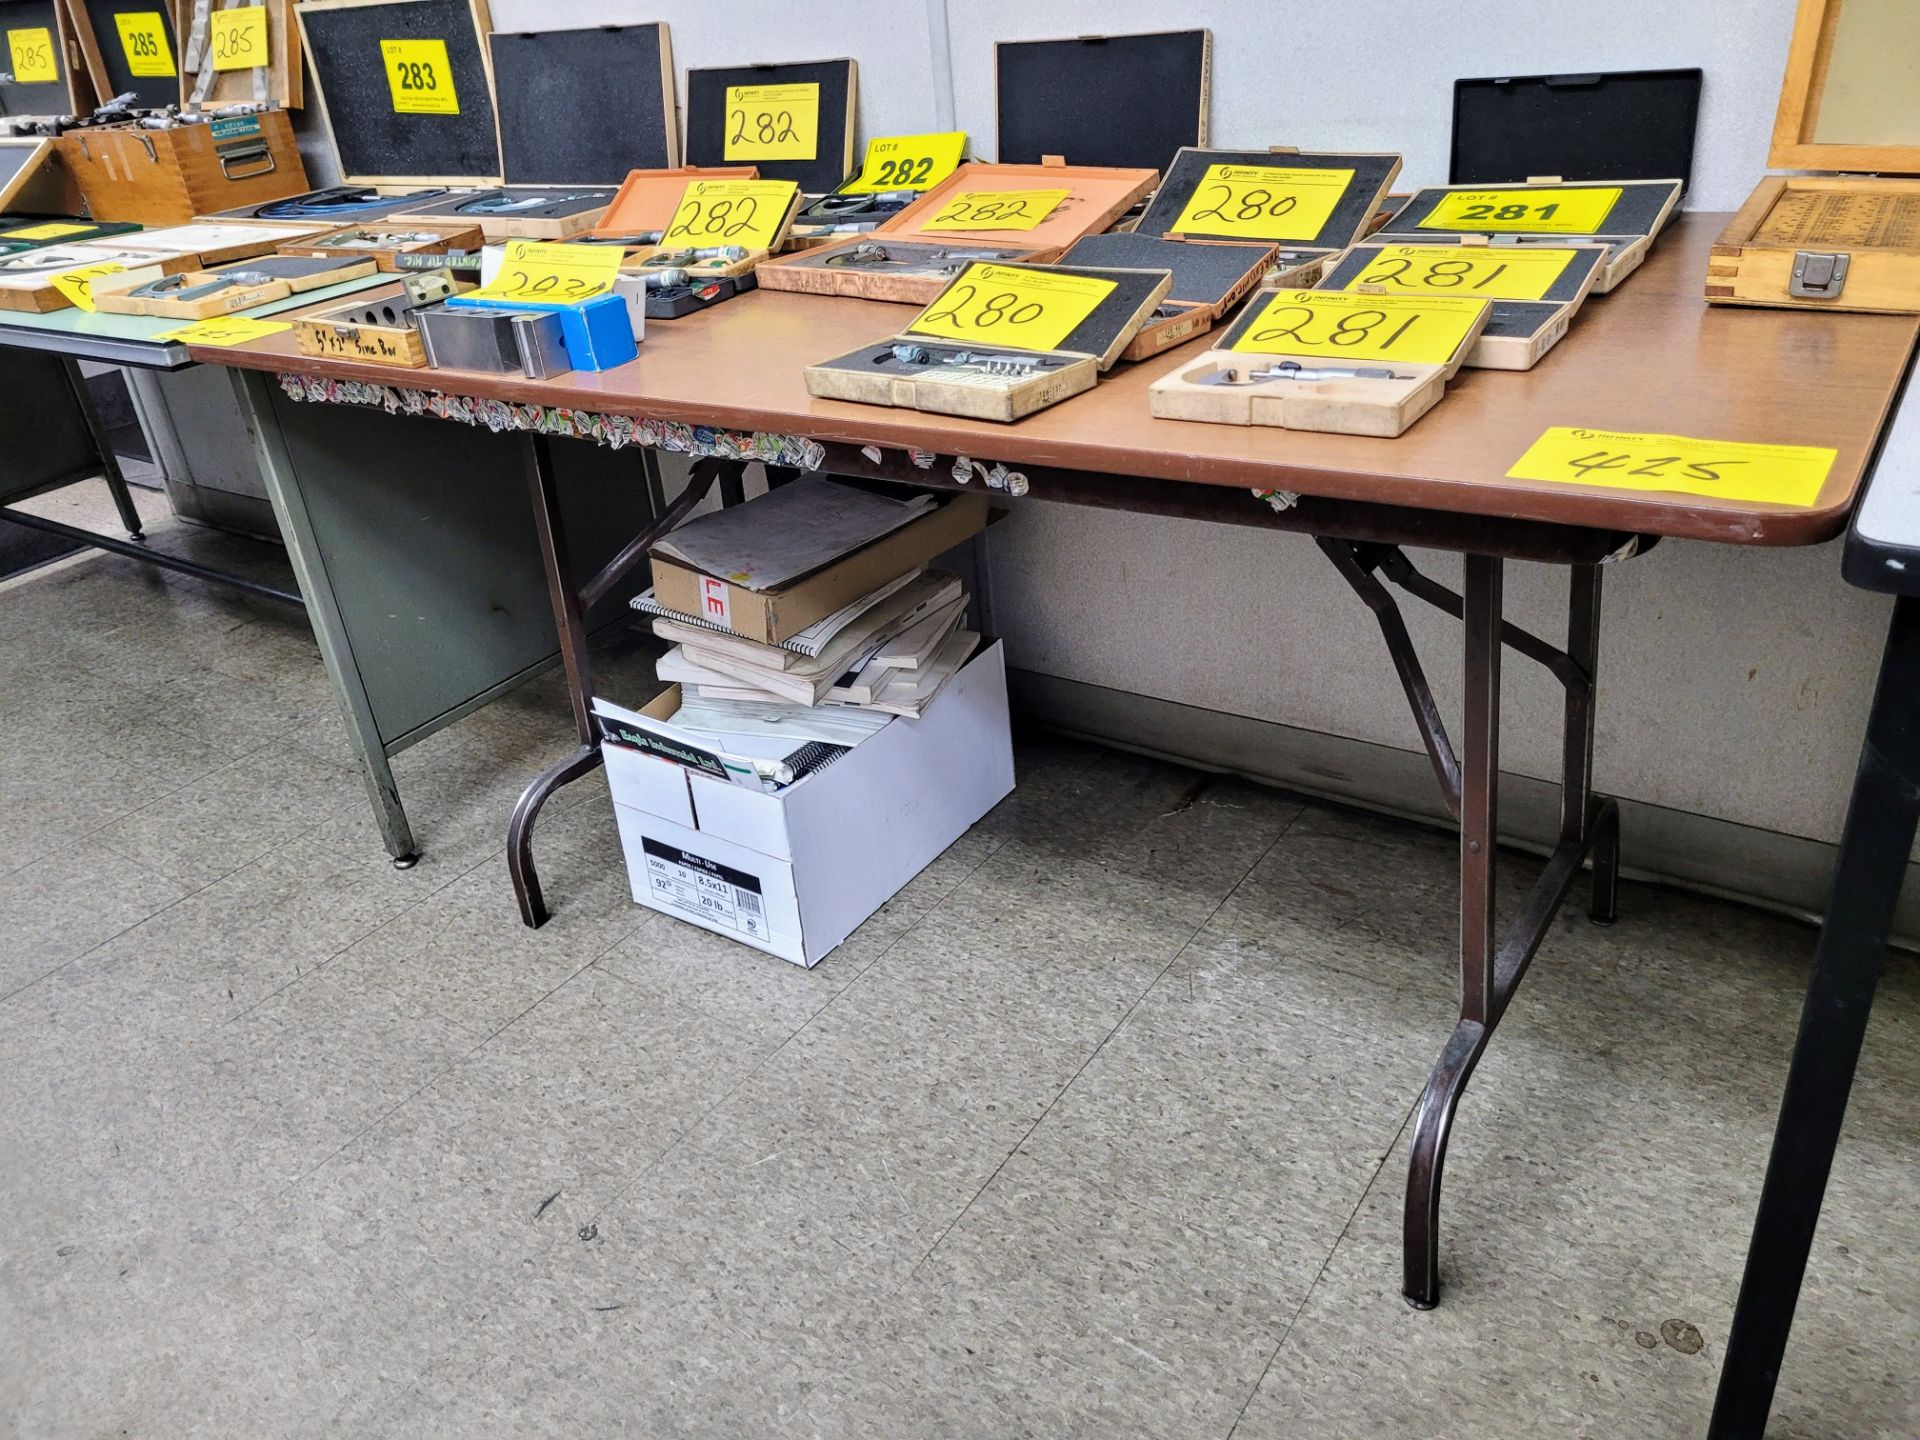 LOT OF (3) TABLES (NO CONTENTS OR SURFACE PLATES) - Image 2 of 3